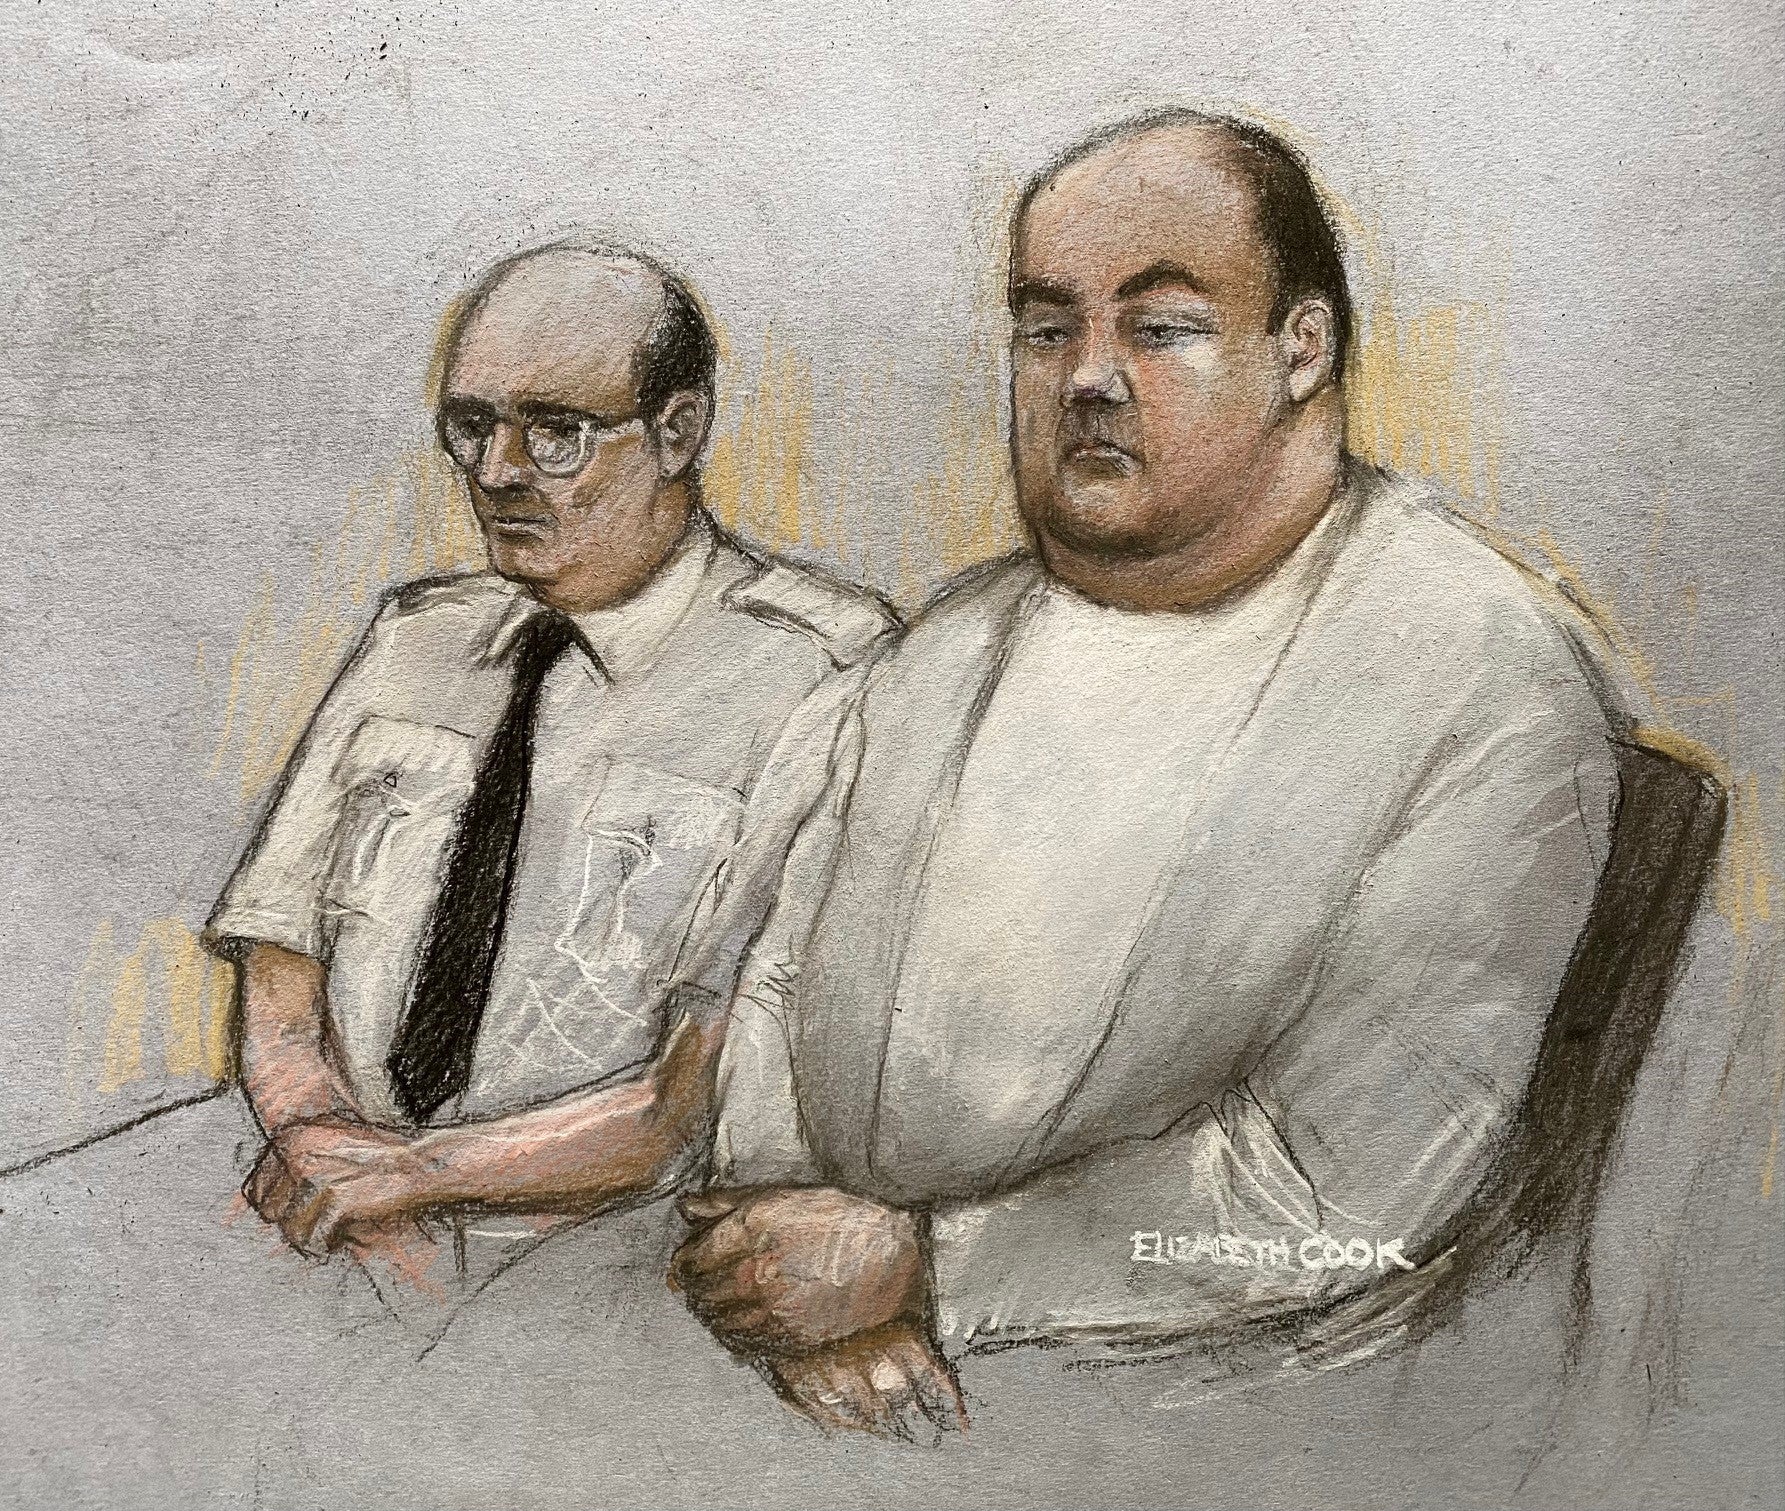 Court sketch of Gavin Plumb at Chelmsford Crown Court